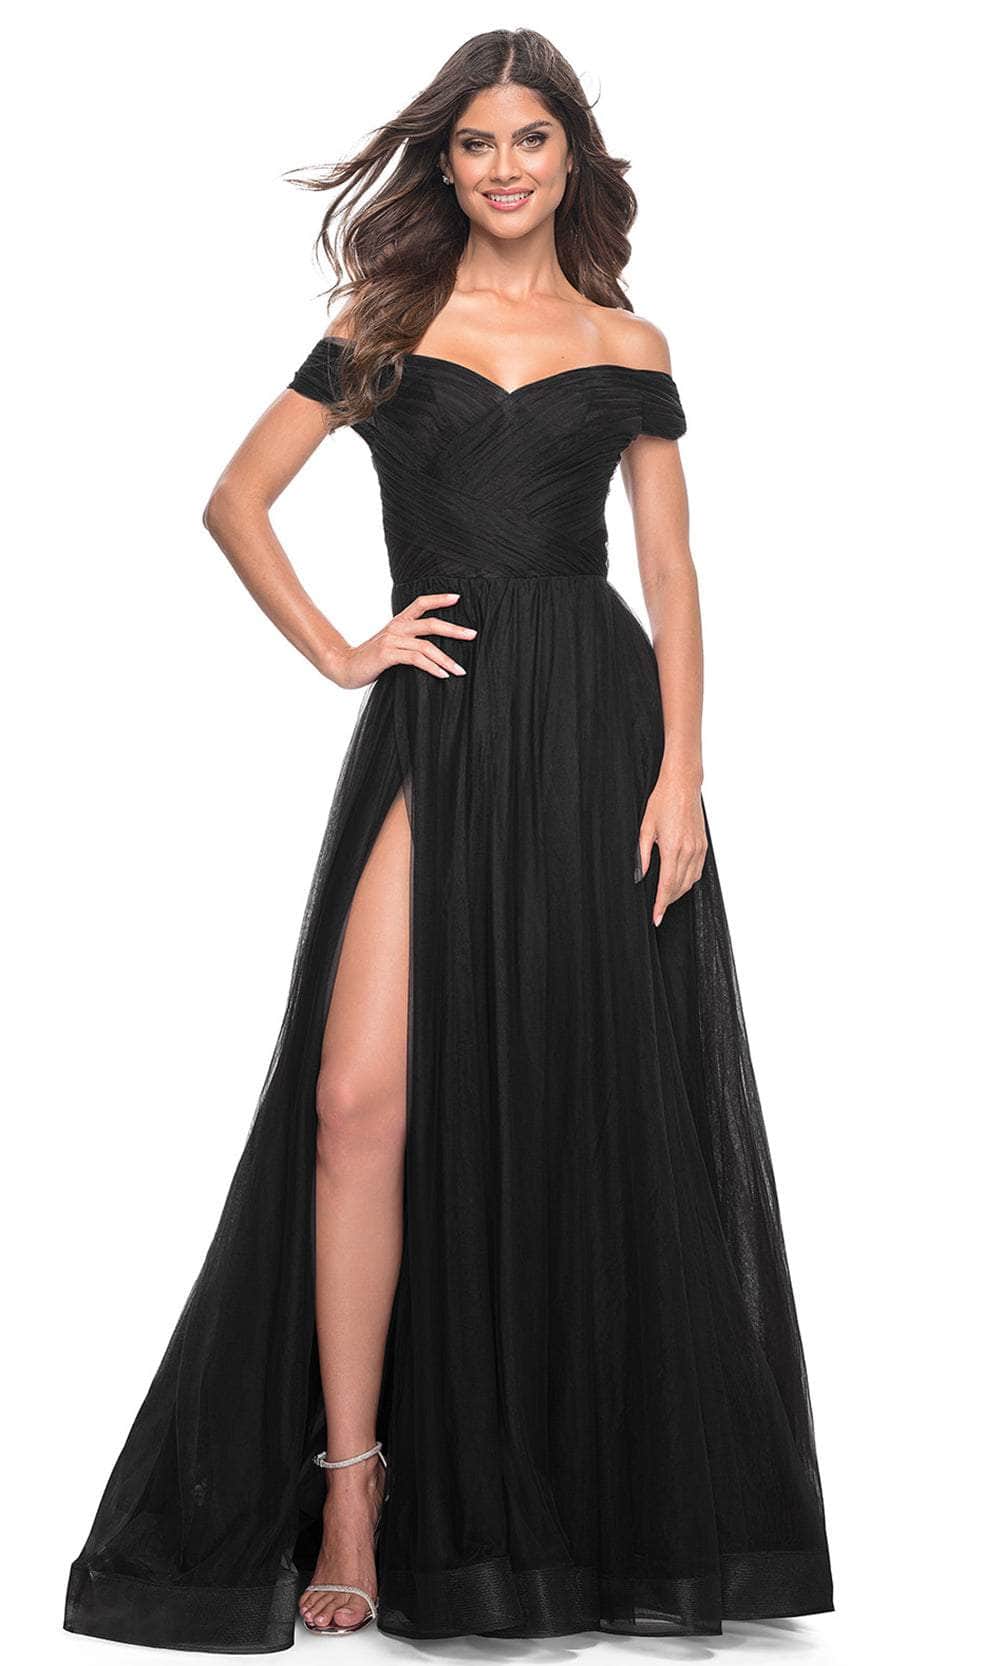 Image of La Femme 30498 - Ethereal Tulle Prom Dress